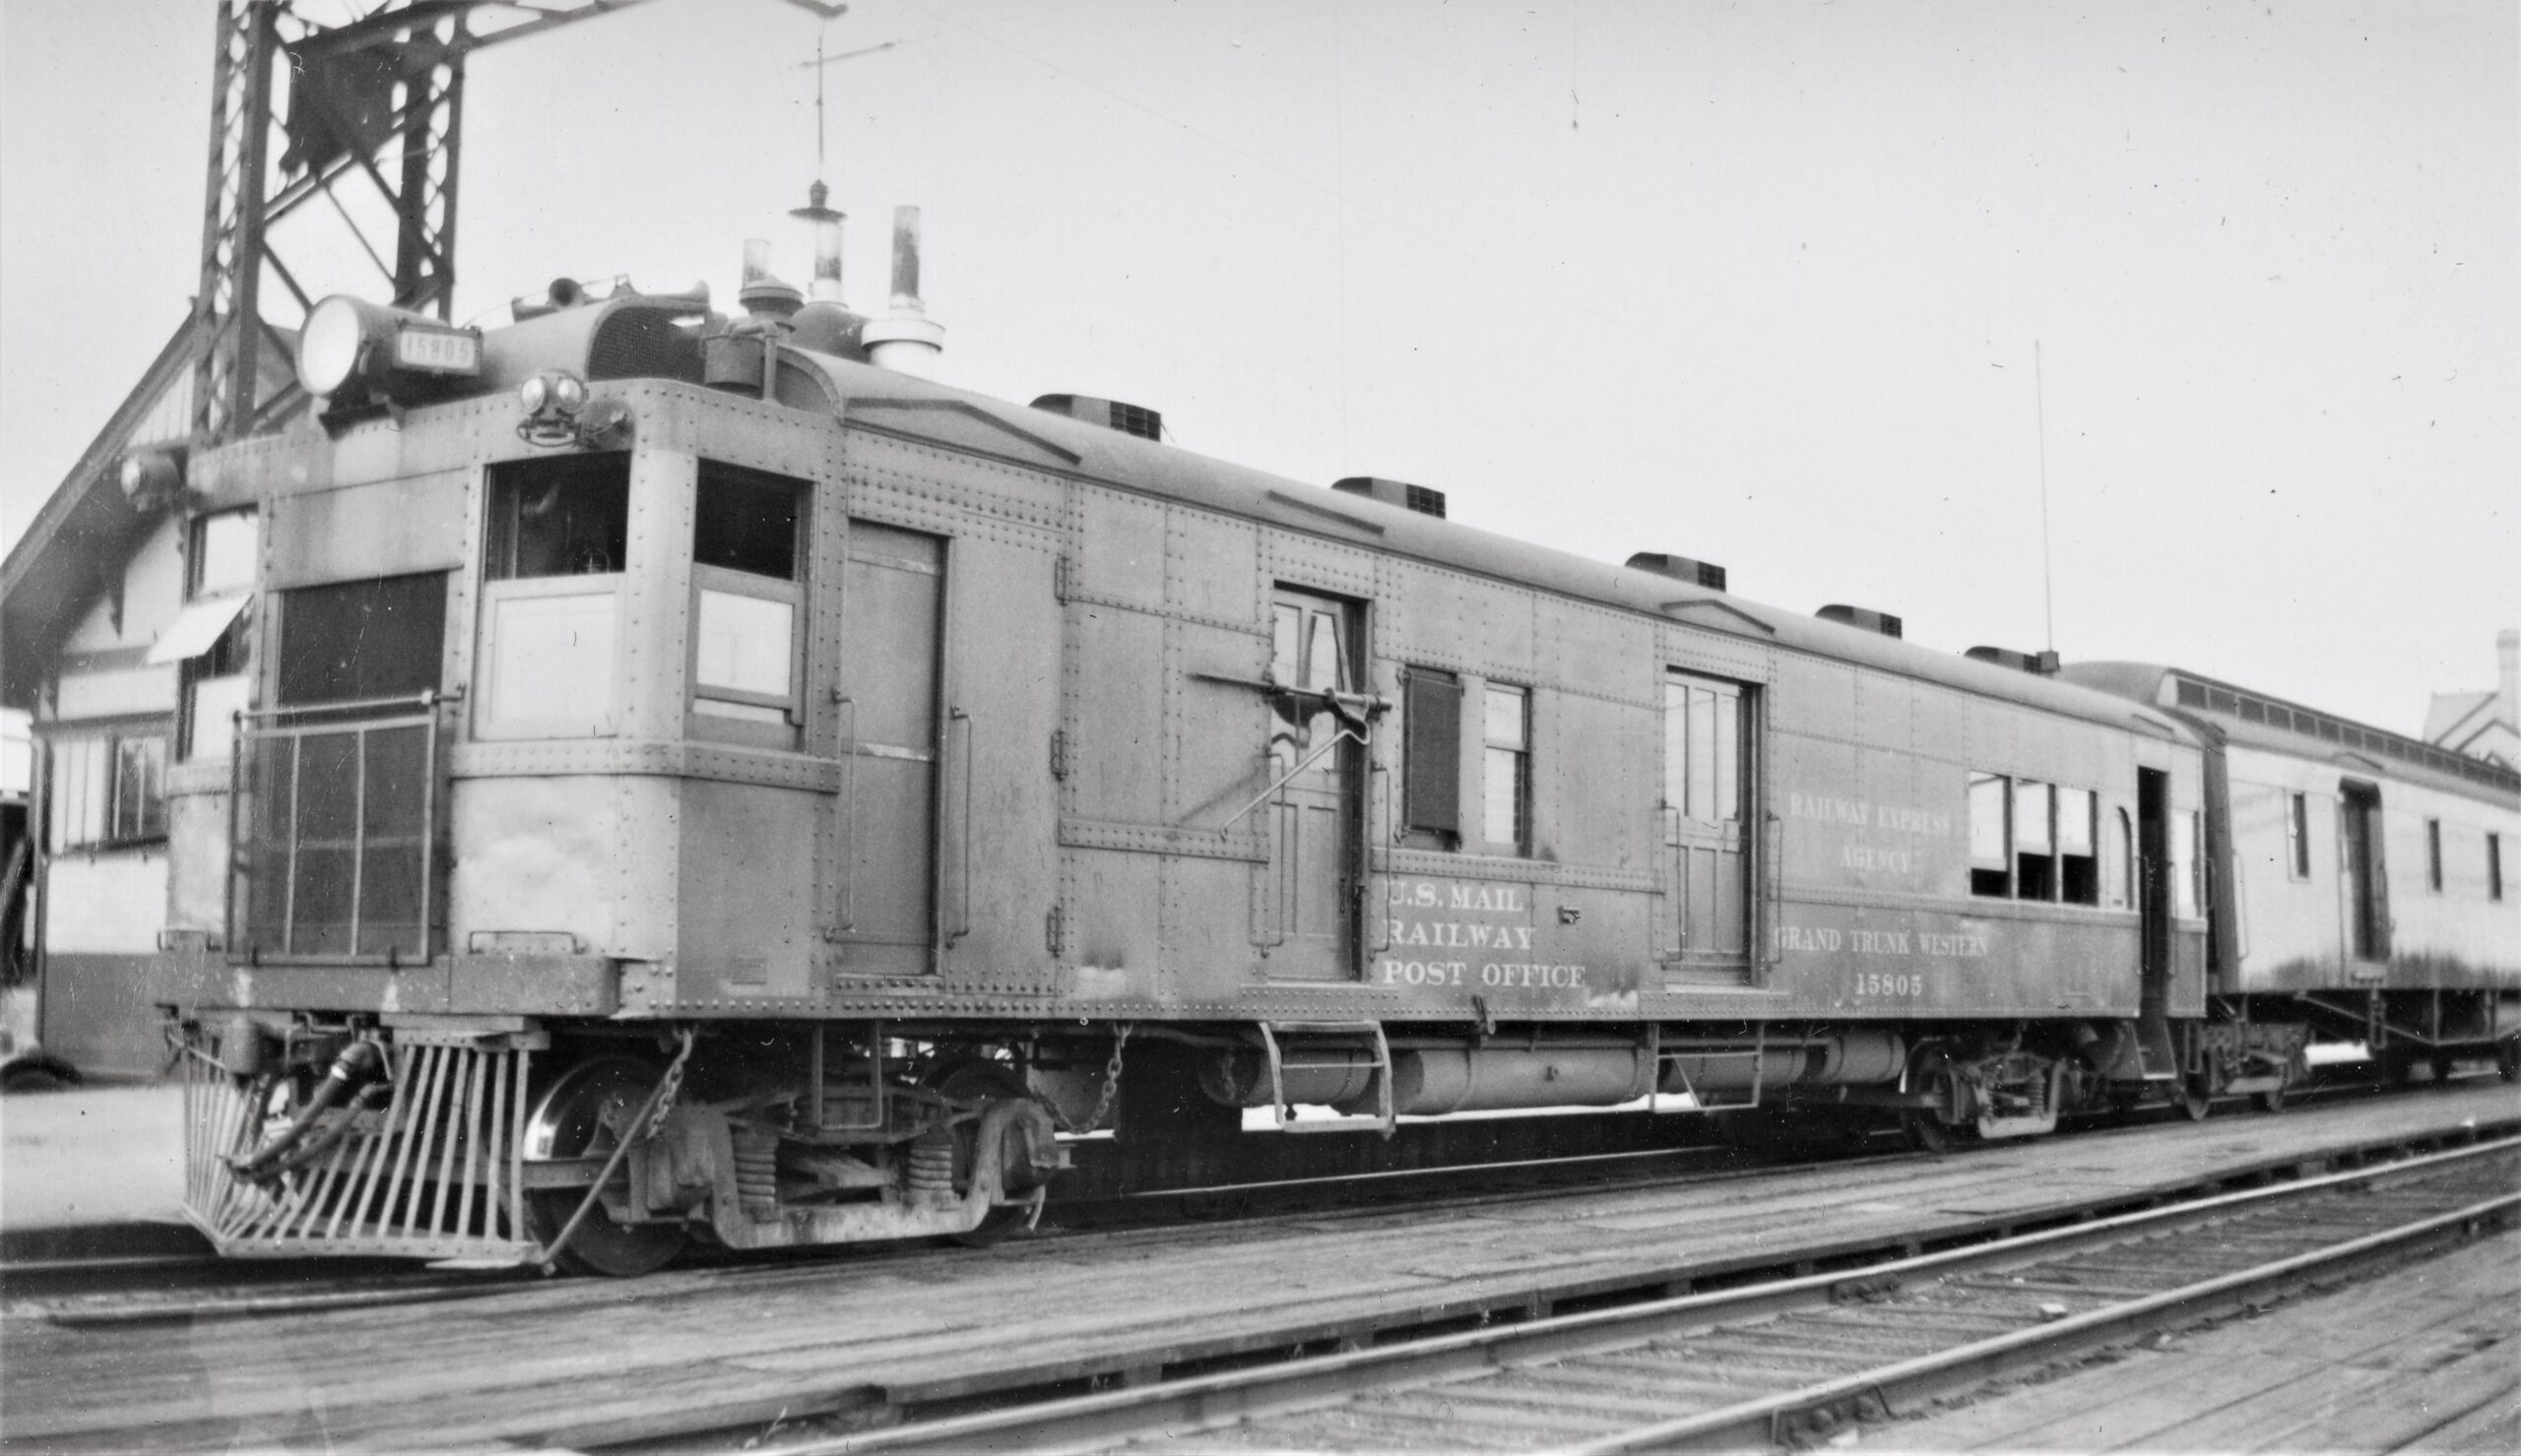 Grand Trunk Western | Huron, Michigan | Gas-electric US Mail Railway Post Office Car #15805 | 1935 | Elmer Kremkow Collection